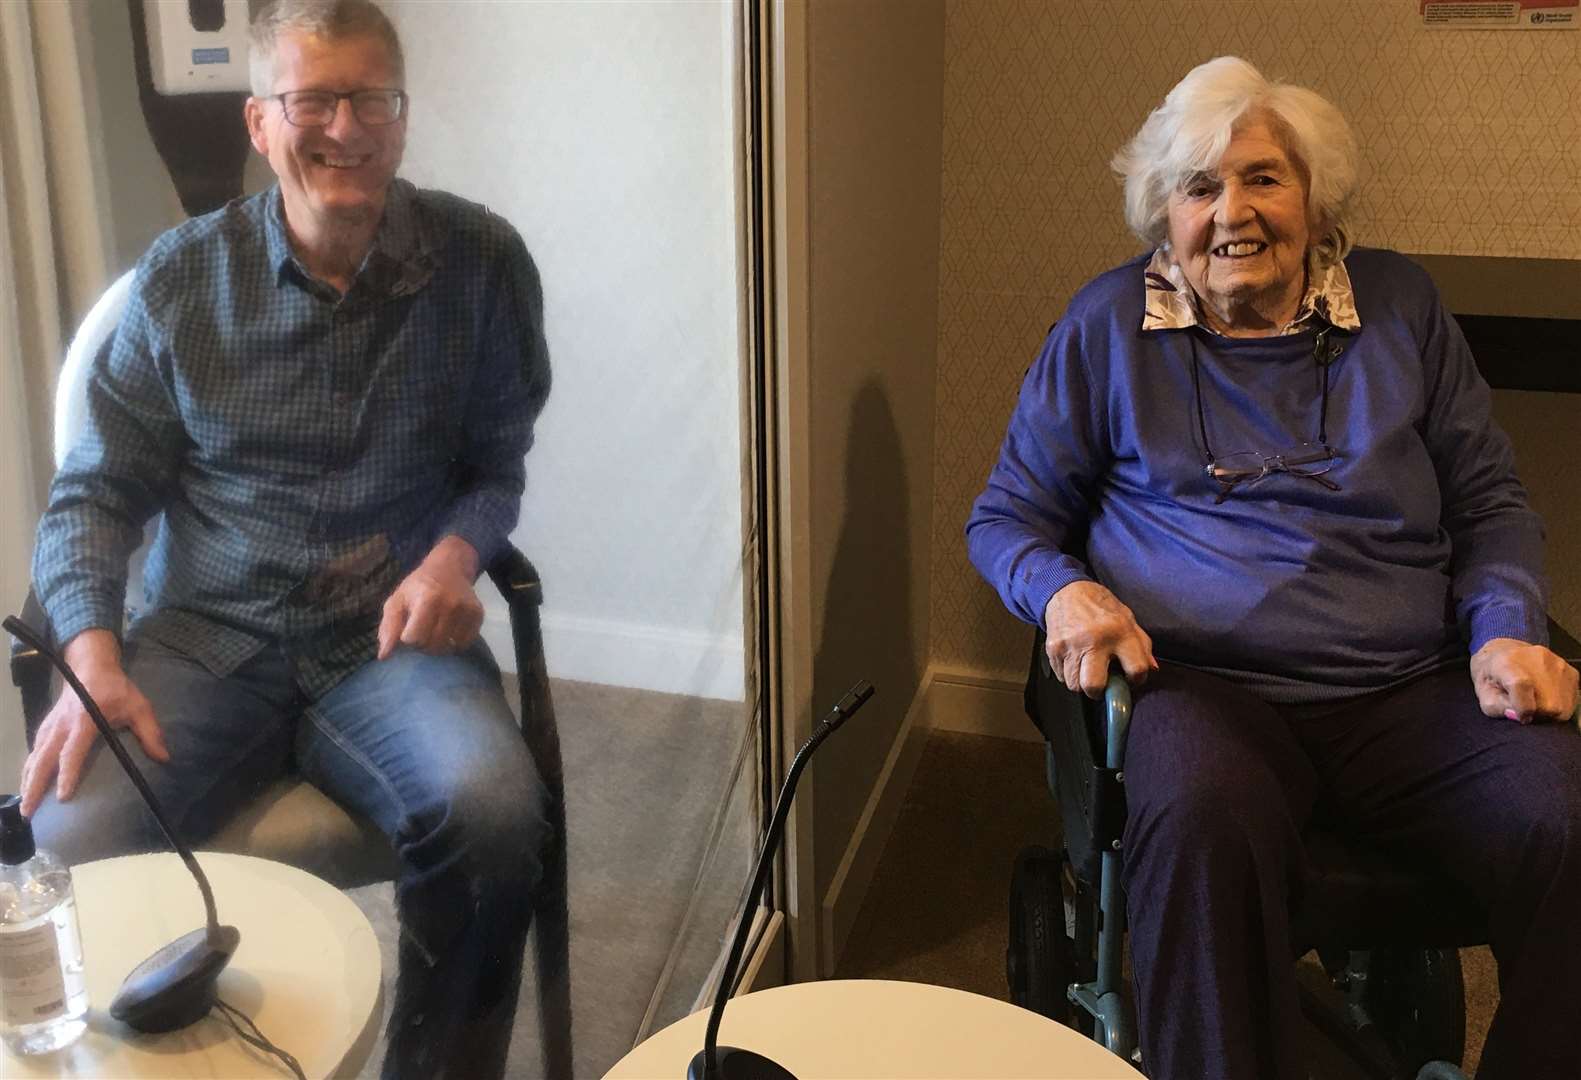 Heather Griffin and her son David Griffin meet face to face, sort of. Picture: Hamberley Care Homes